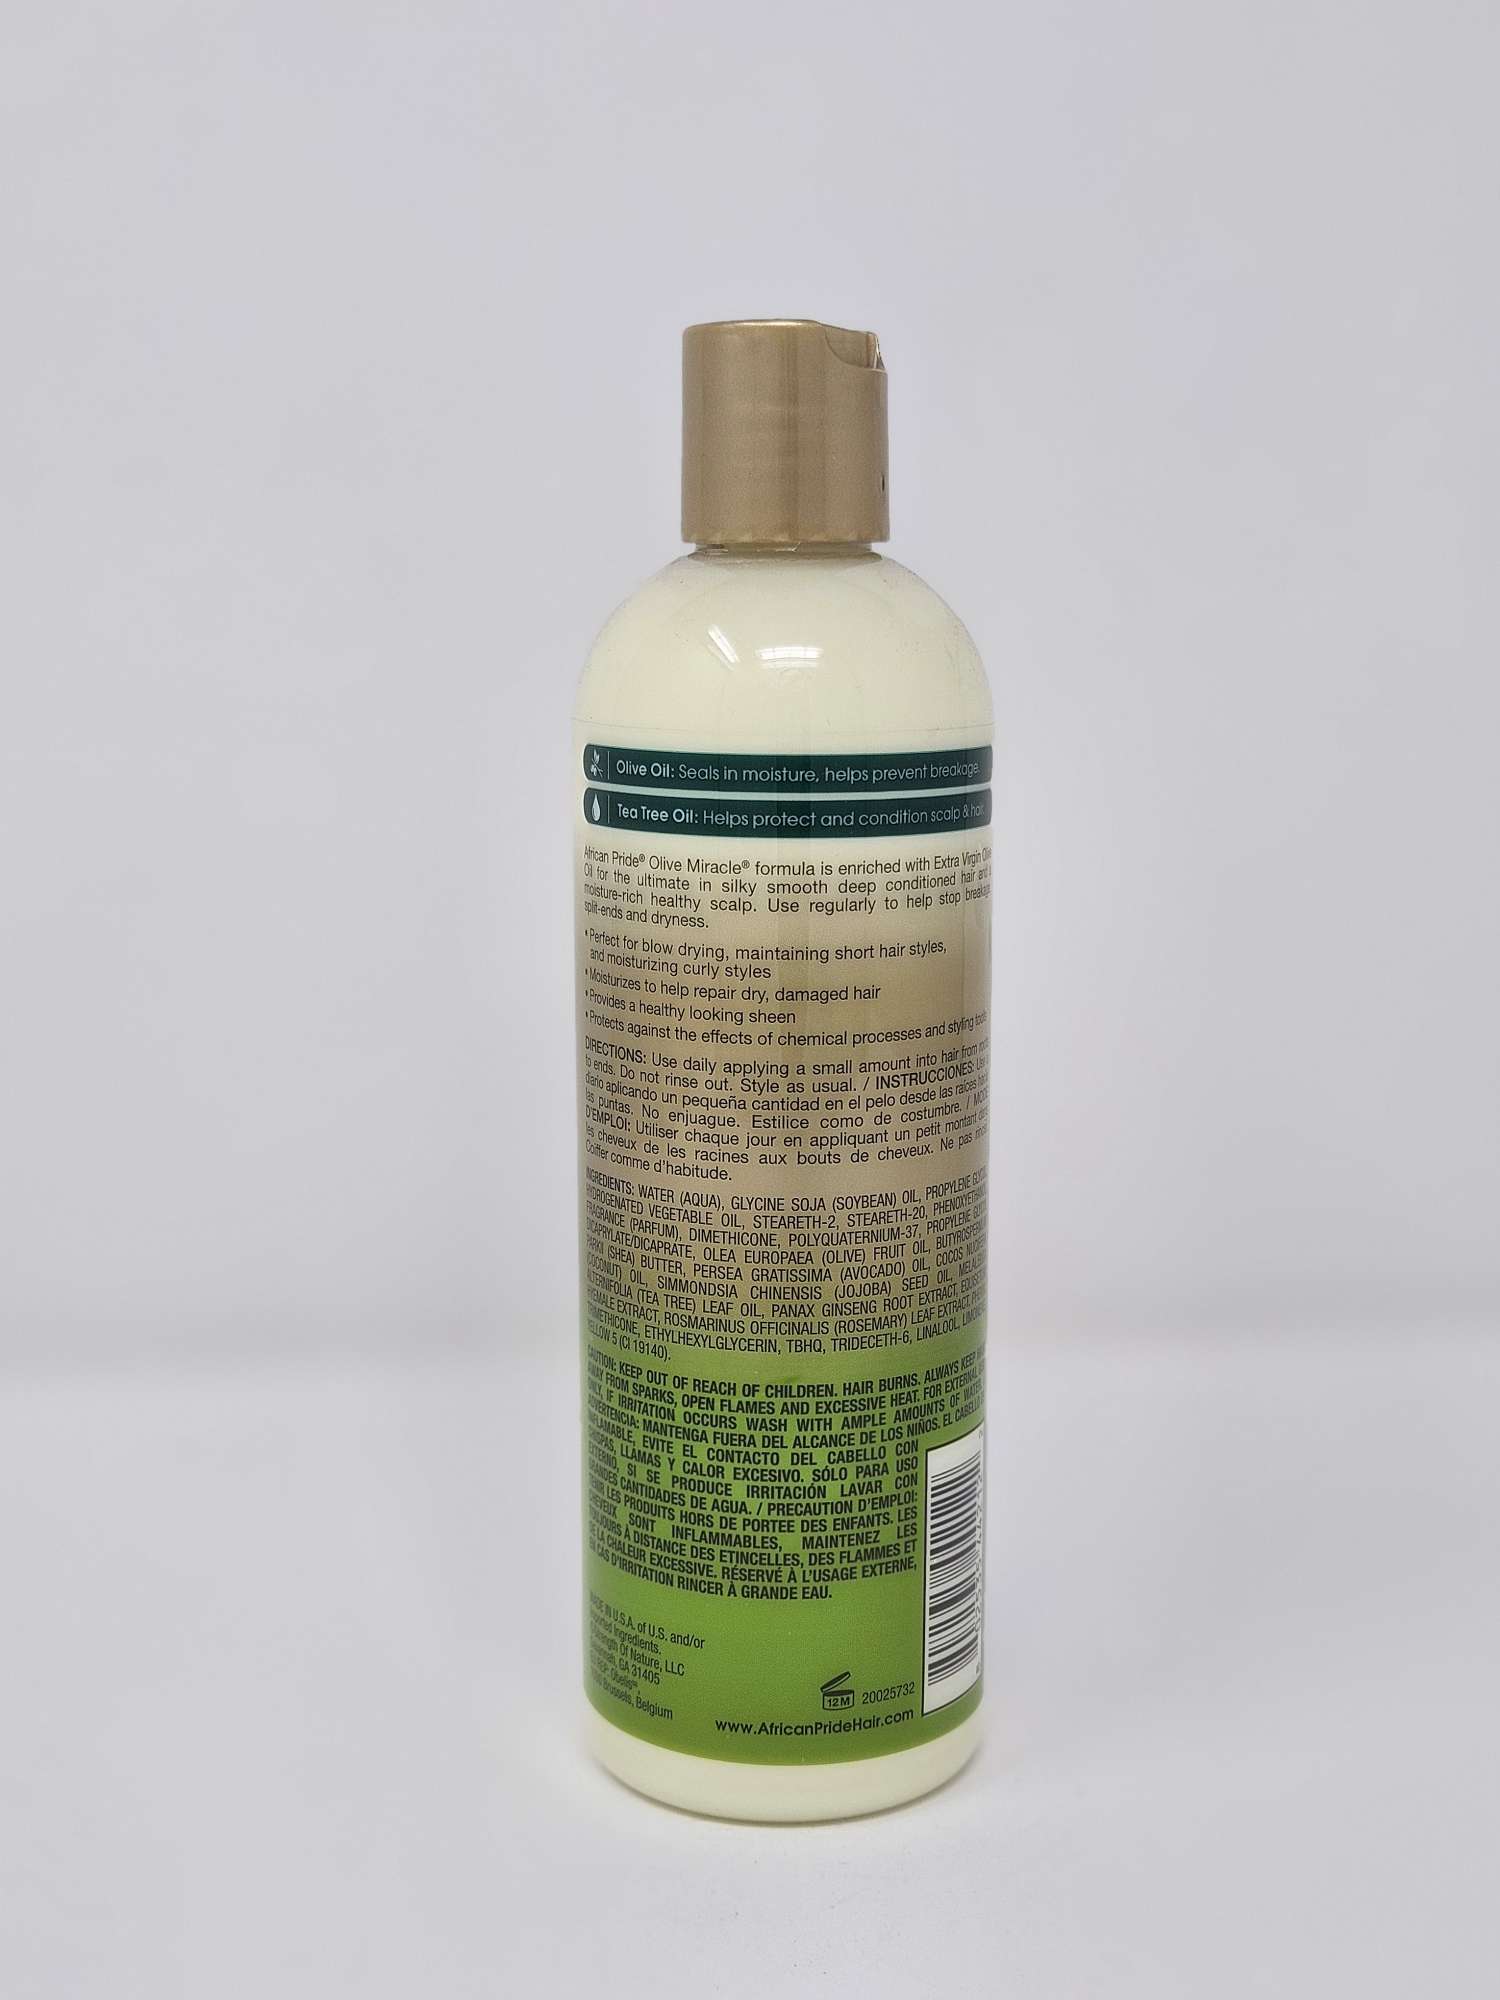 African Pride Olive Miracle Daily Hydration Oil Moisturizing Lotion - 12oz